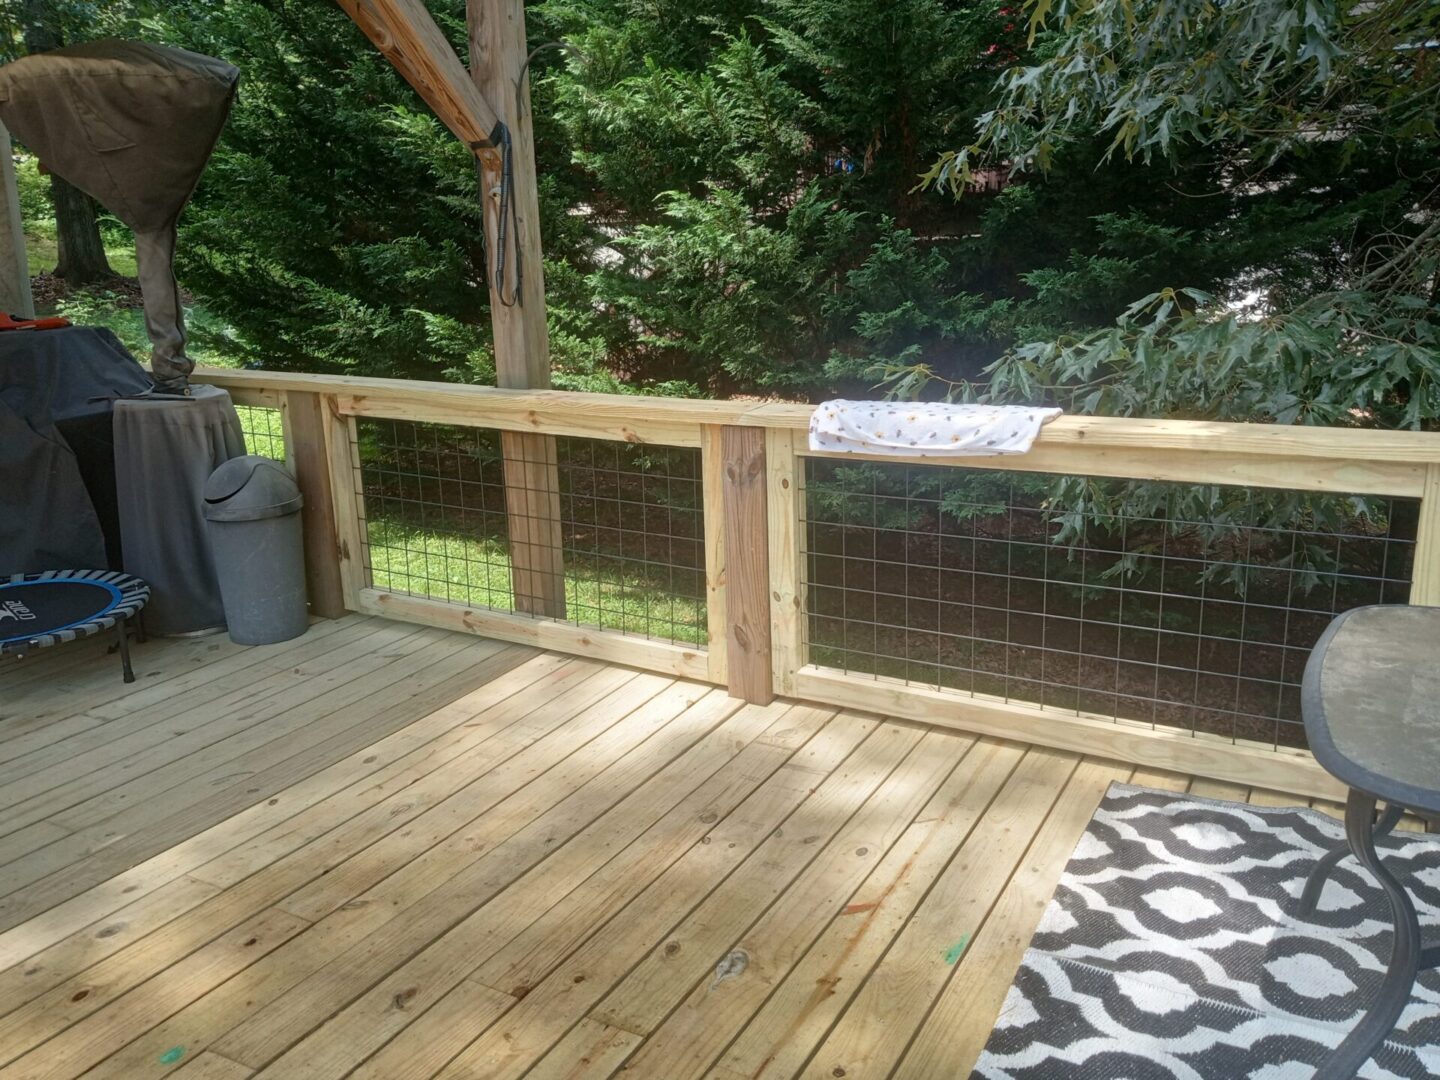 A wooden deck with a metal fence on the side.